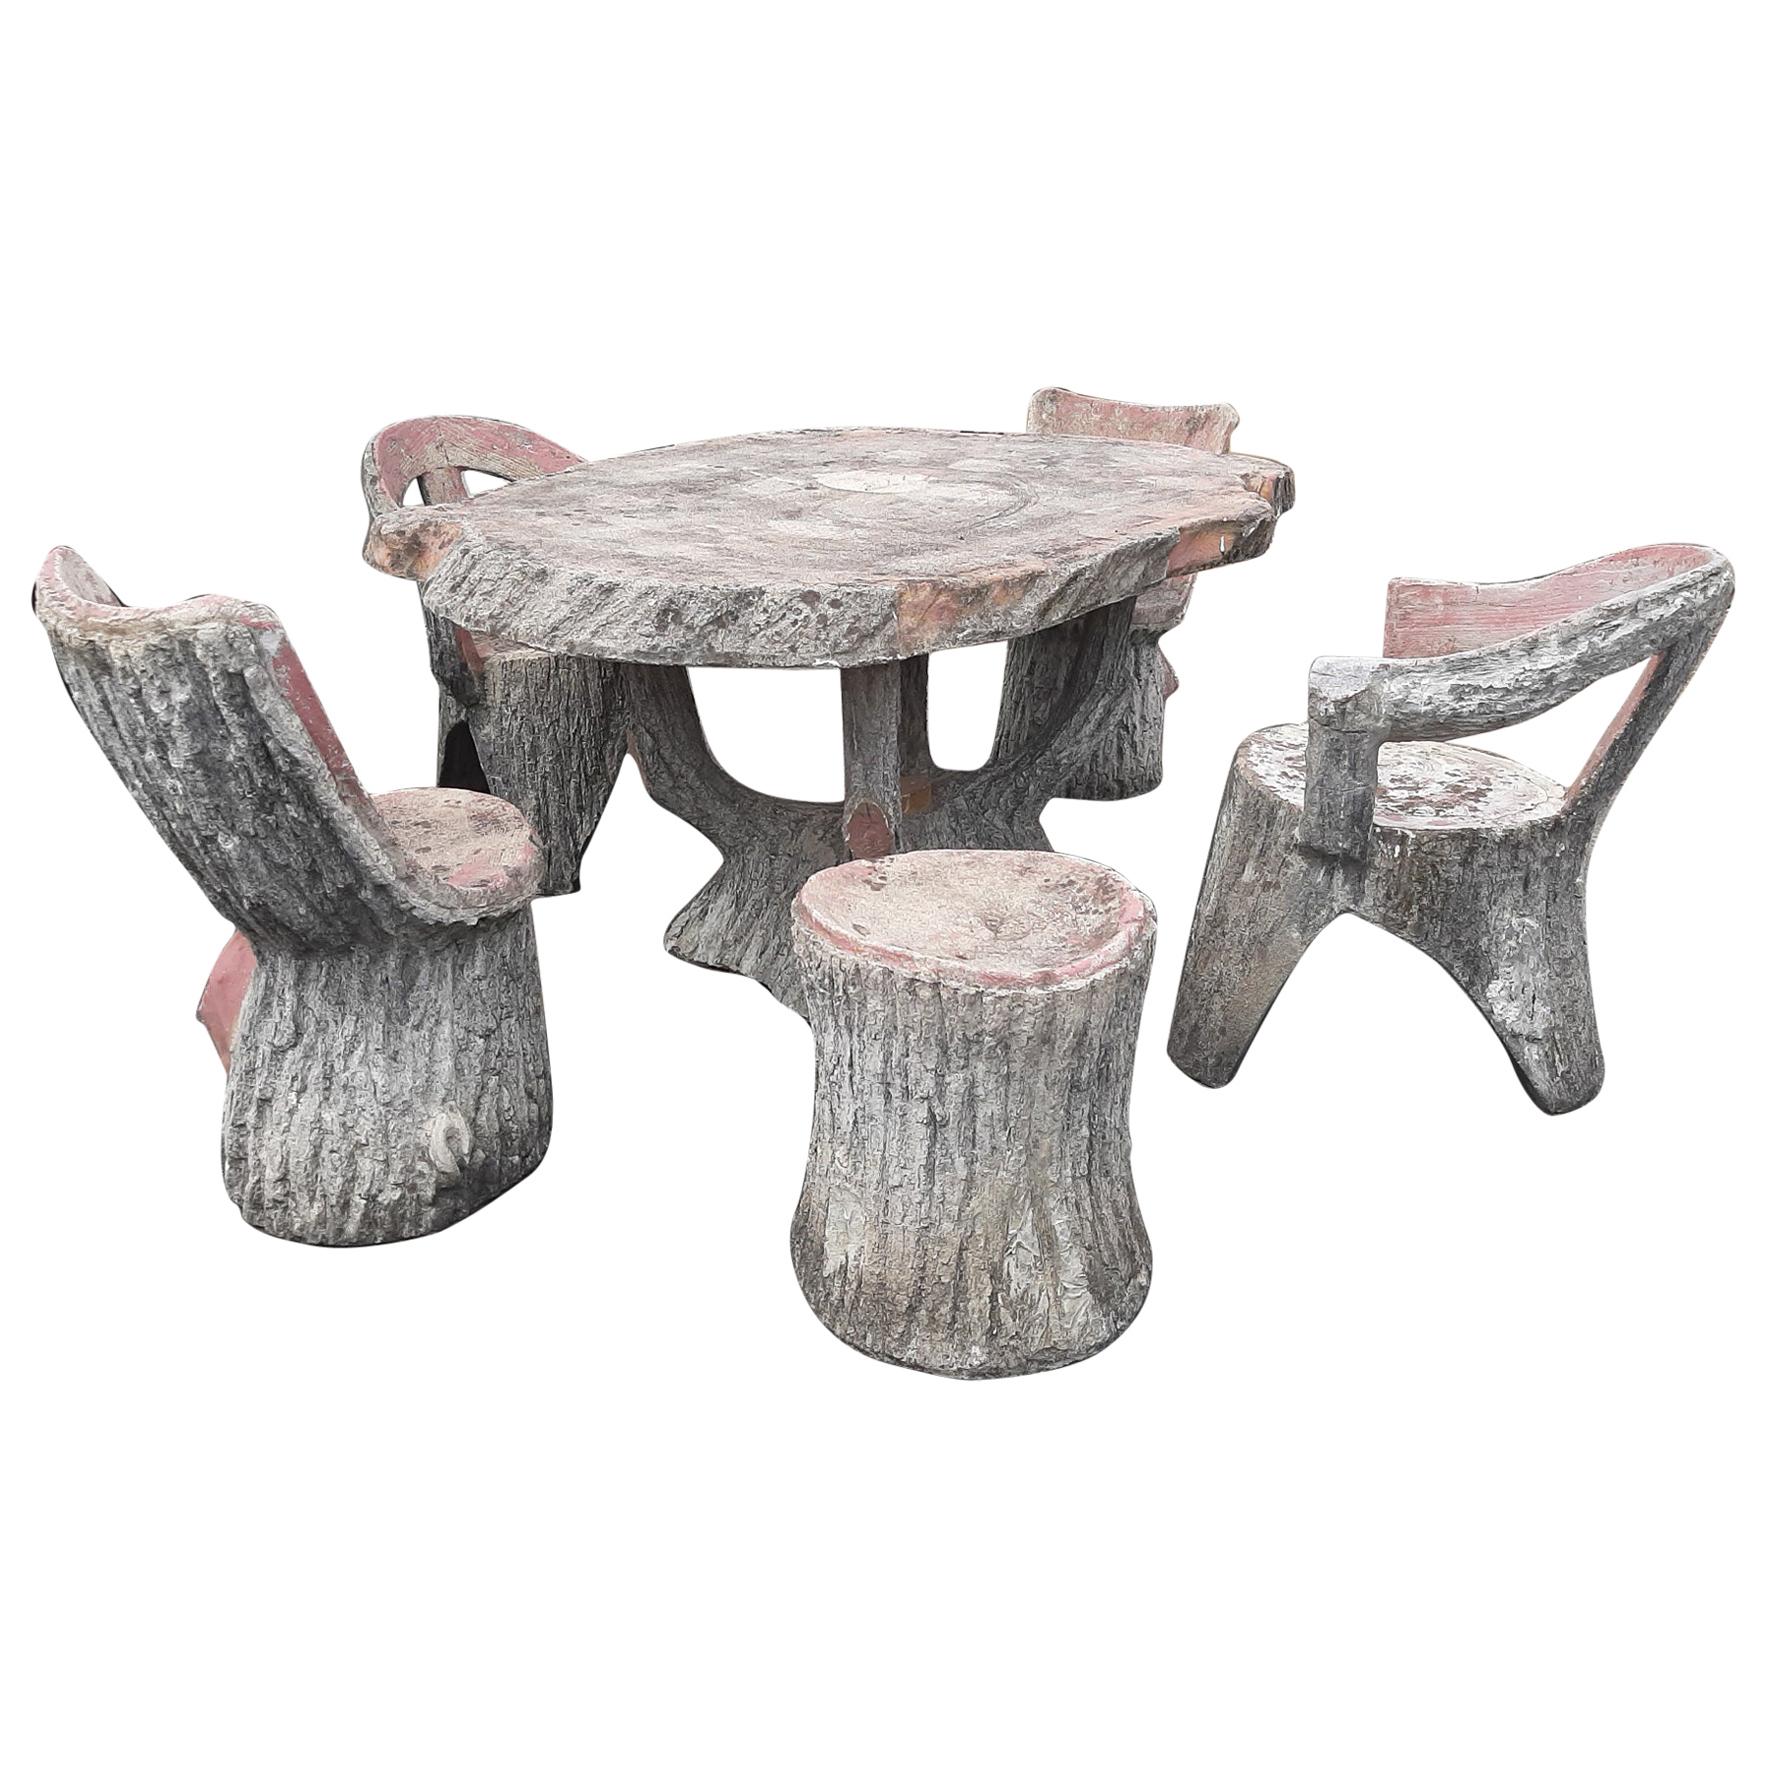 Midcentury Faux Bois Stone Garden Table and Chairs